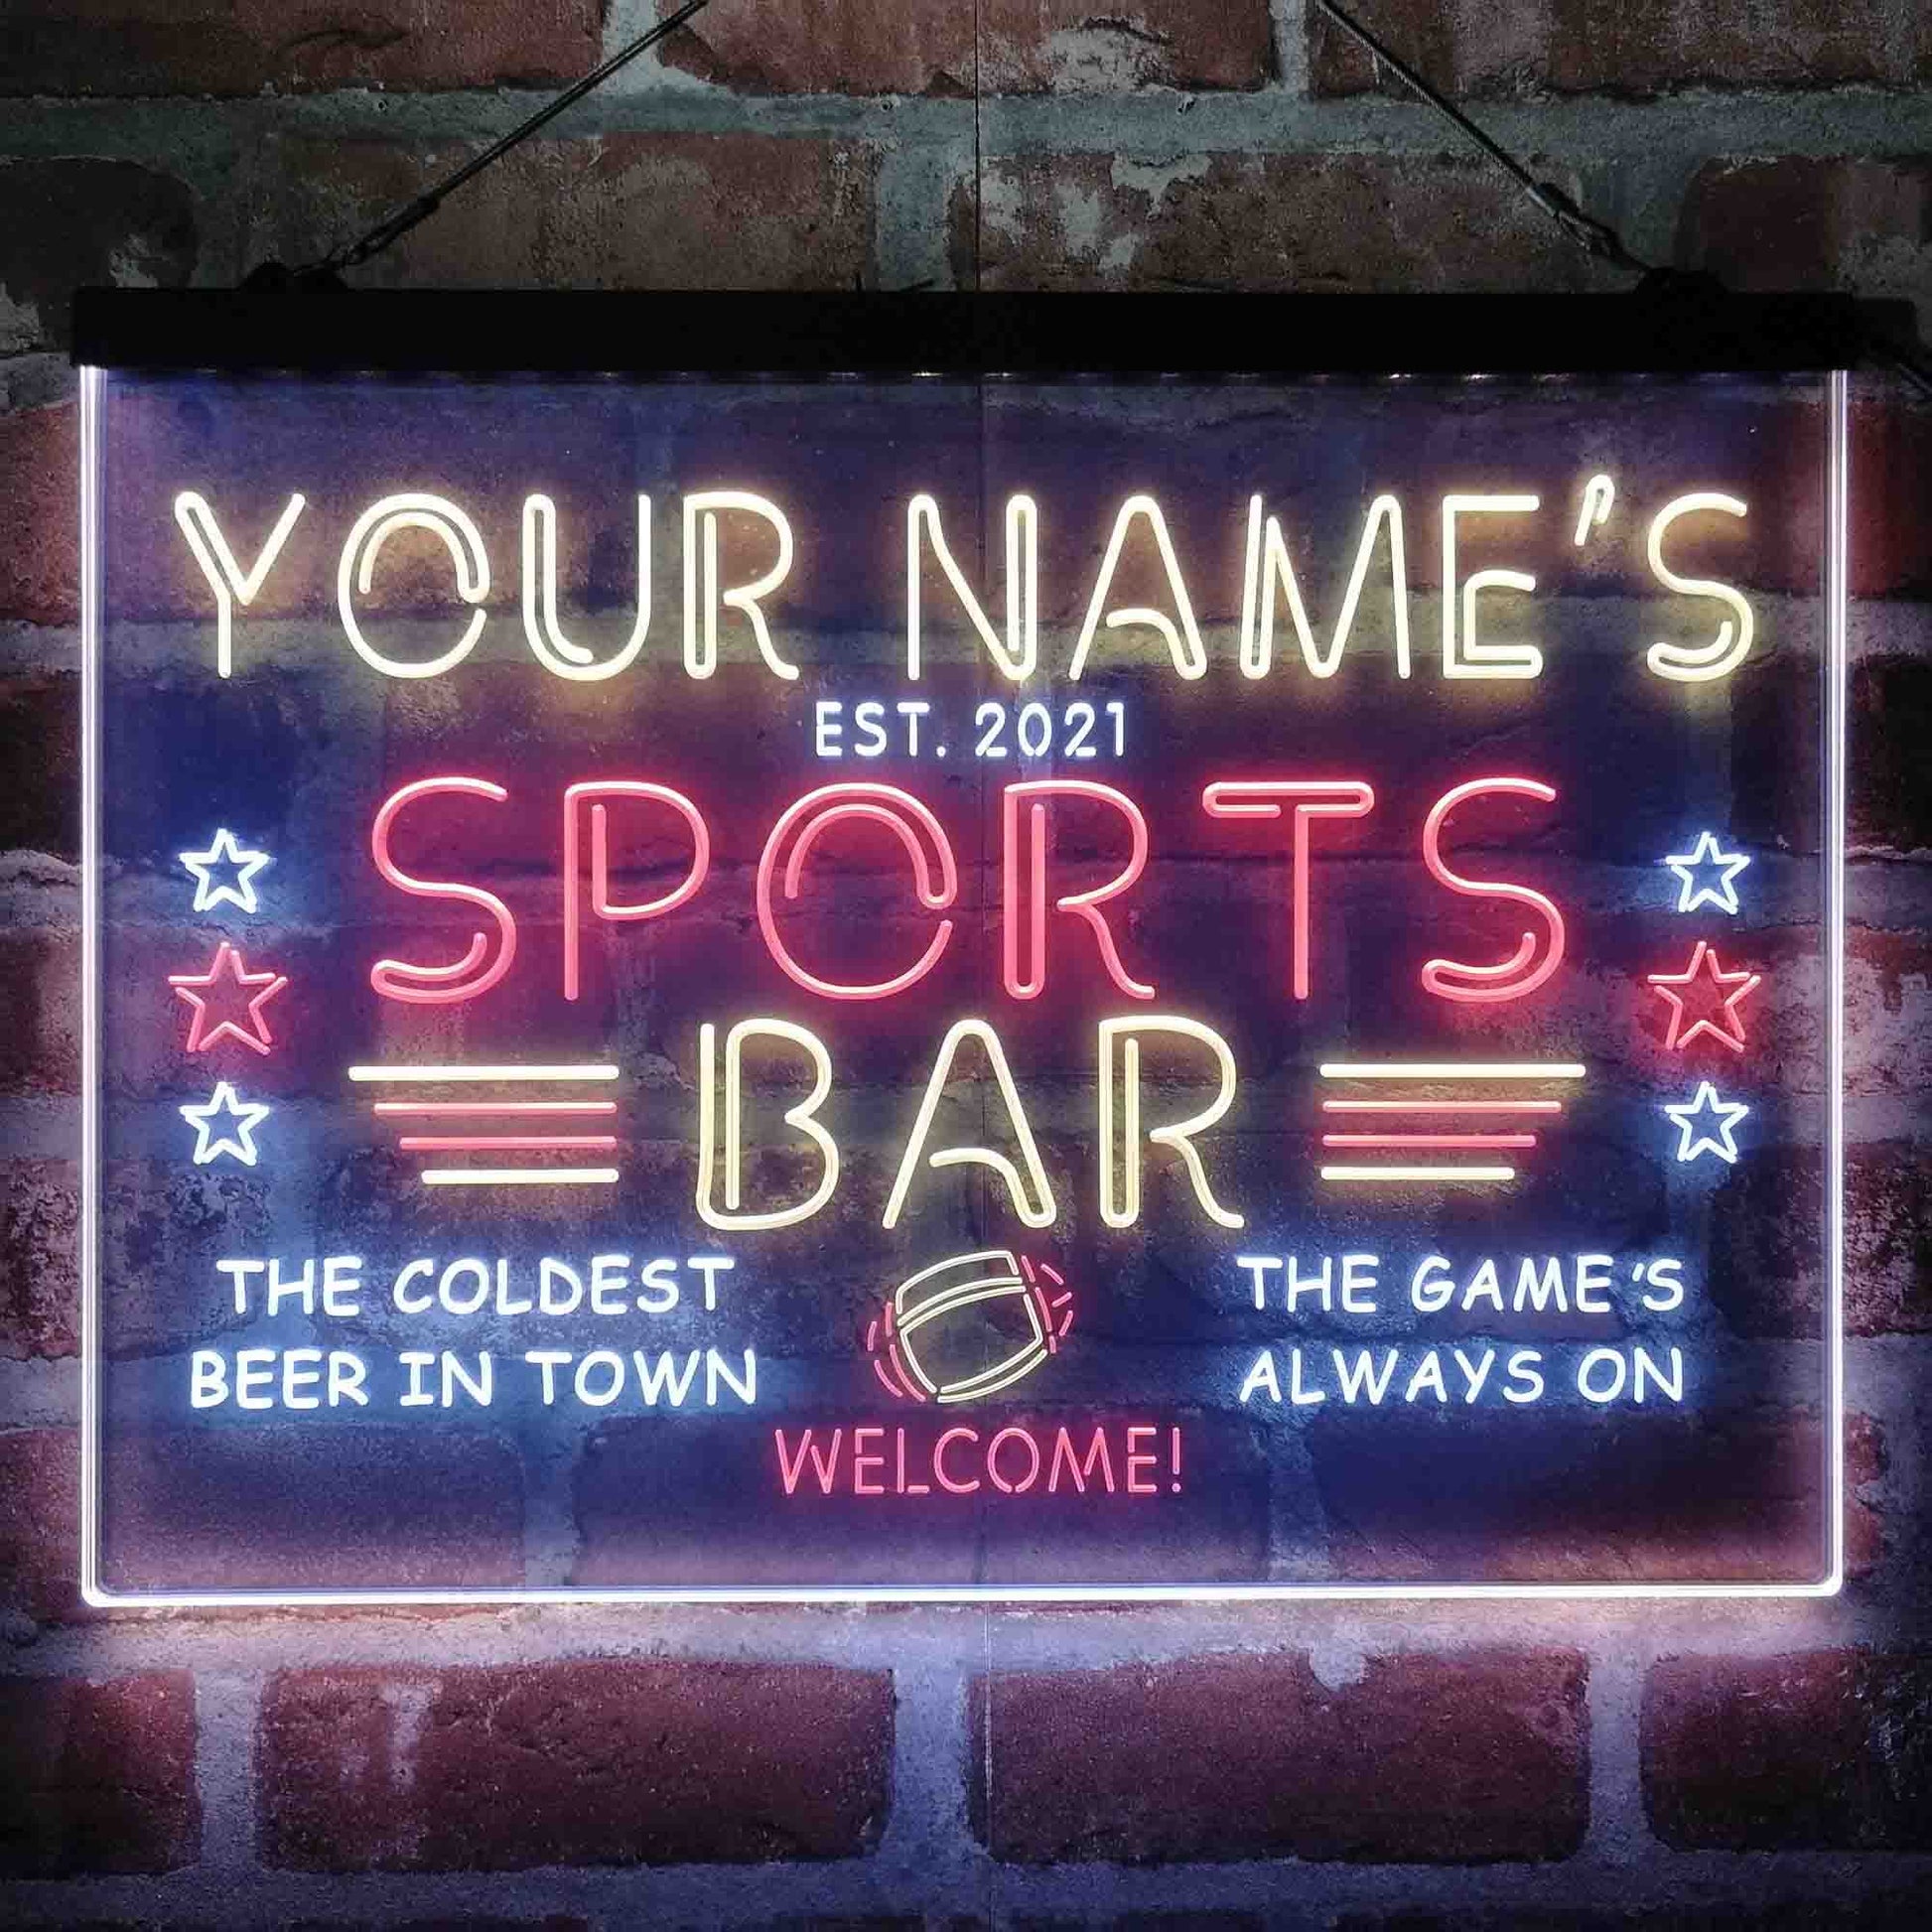 Personalized Sports Base Home Bar 3-Color LED Neon Light Sign - Way Up Gifts